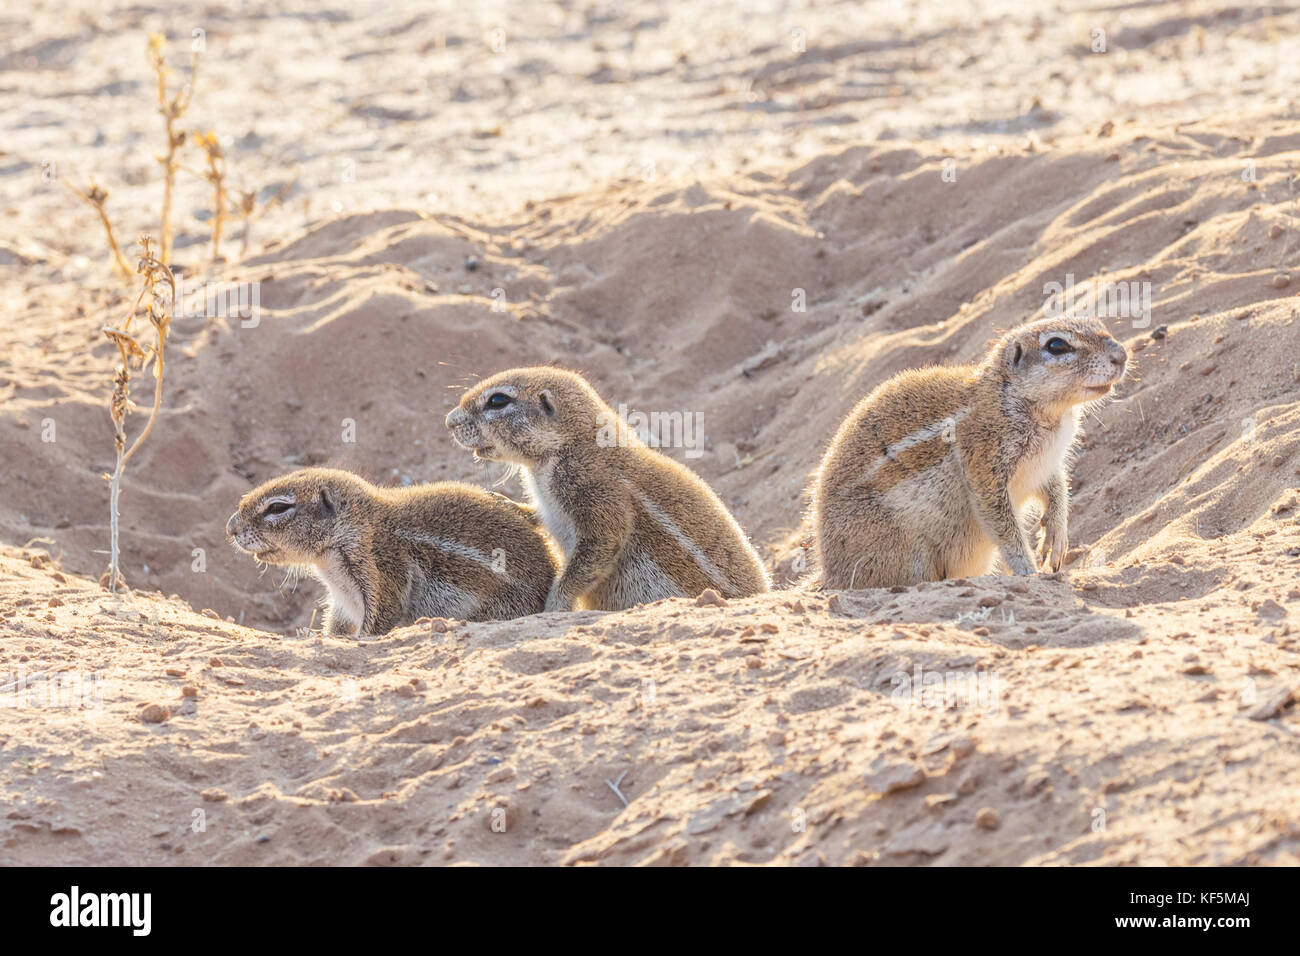 Cape ground squirrel  in a burrow in the Kgalagadi Transfrontier Park, situated in the Kalahari Desert which straddles South Africa and Botswana. Stock Photo